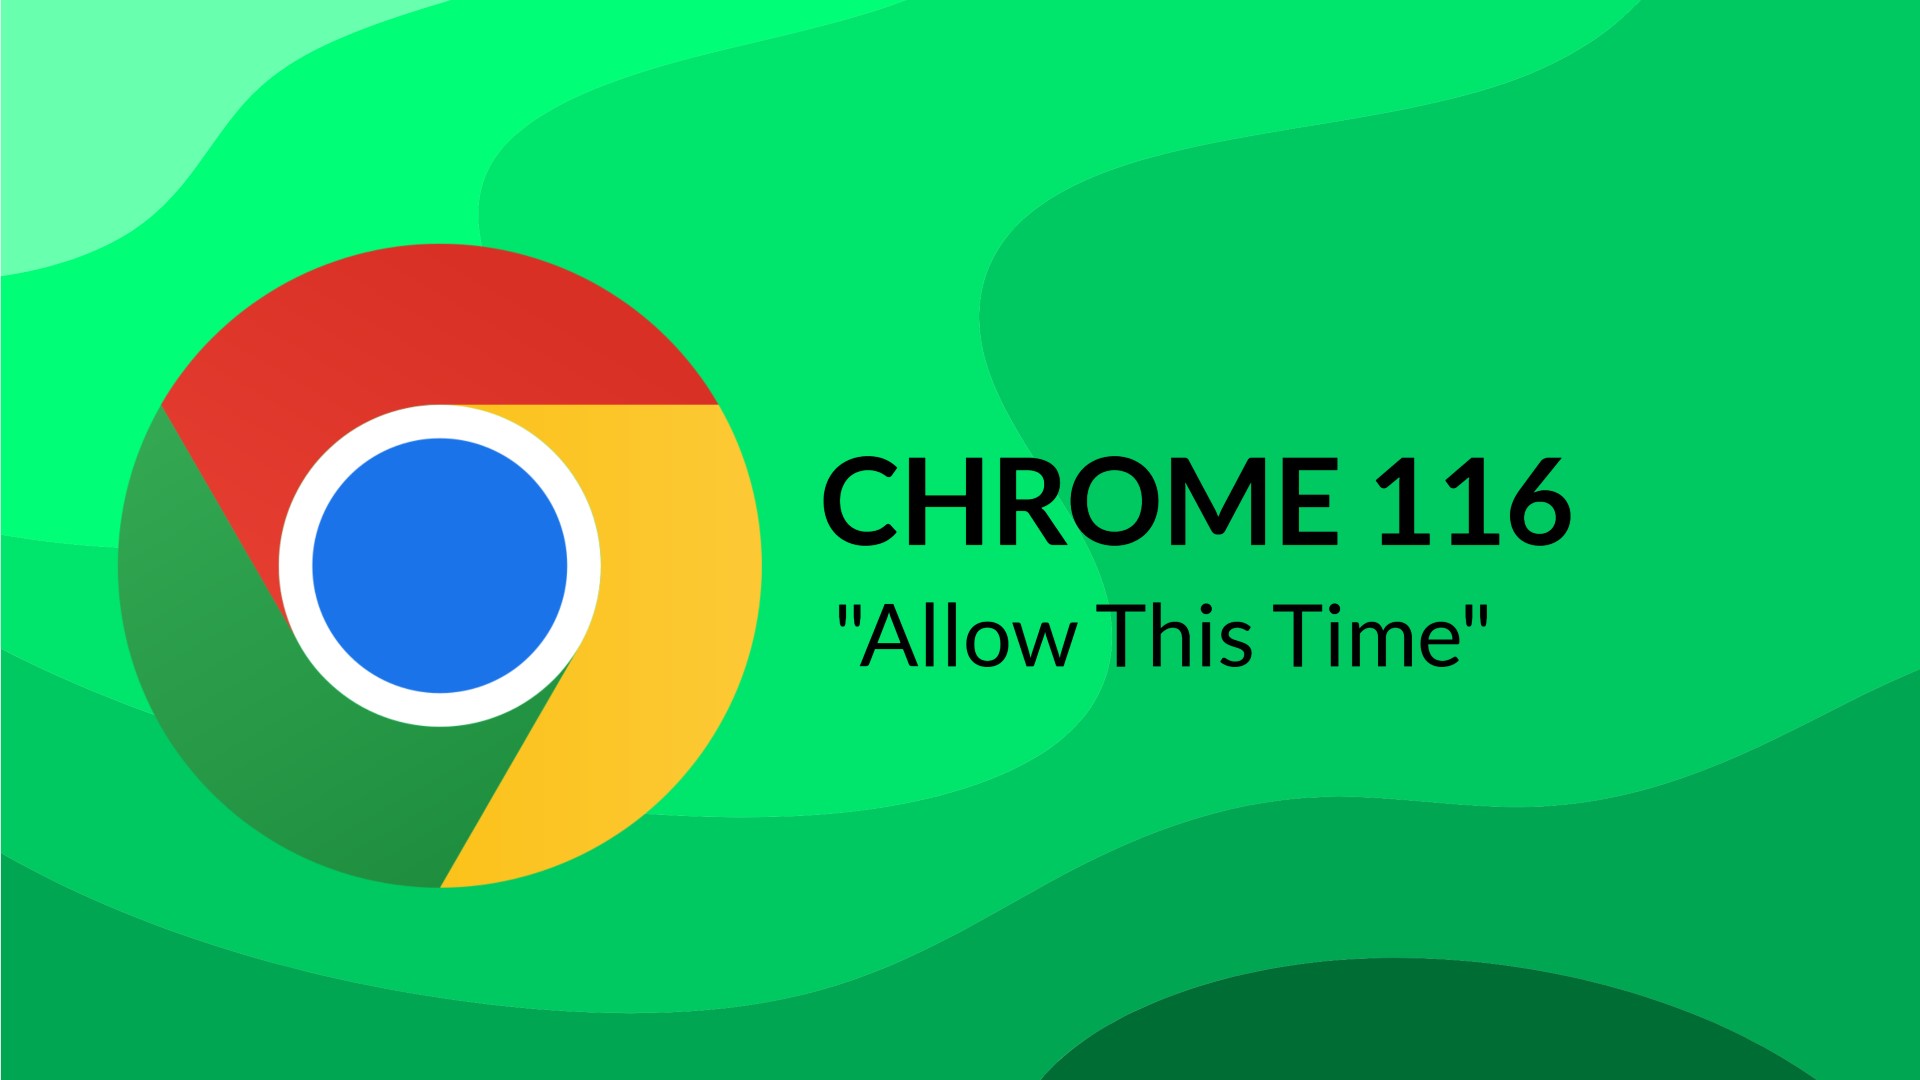 chrome 116 update lets you grant 'allow this time' access to websites